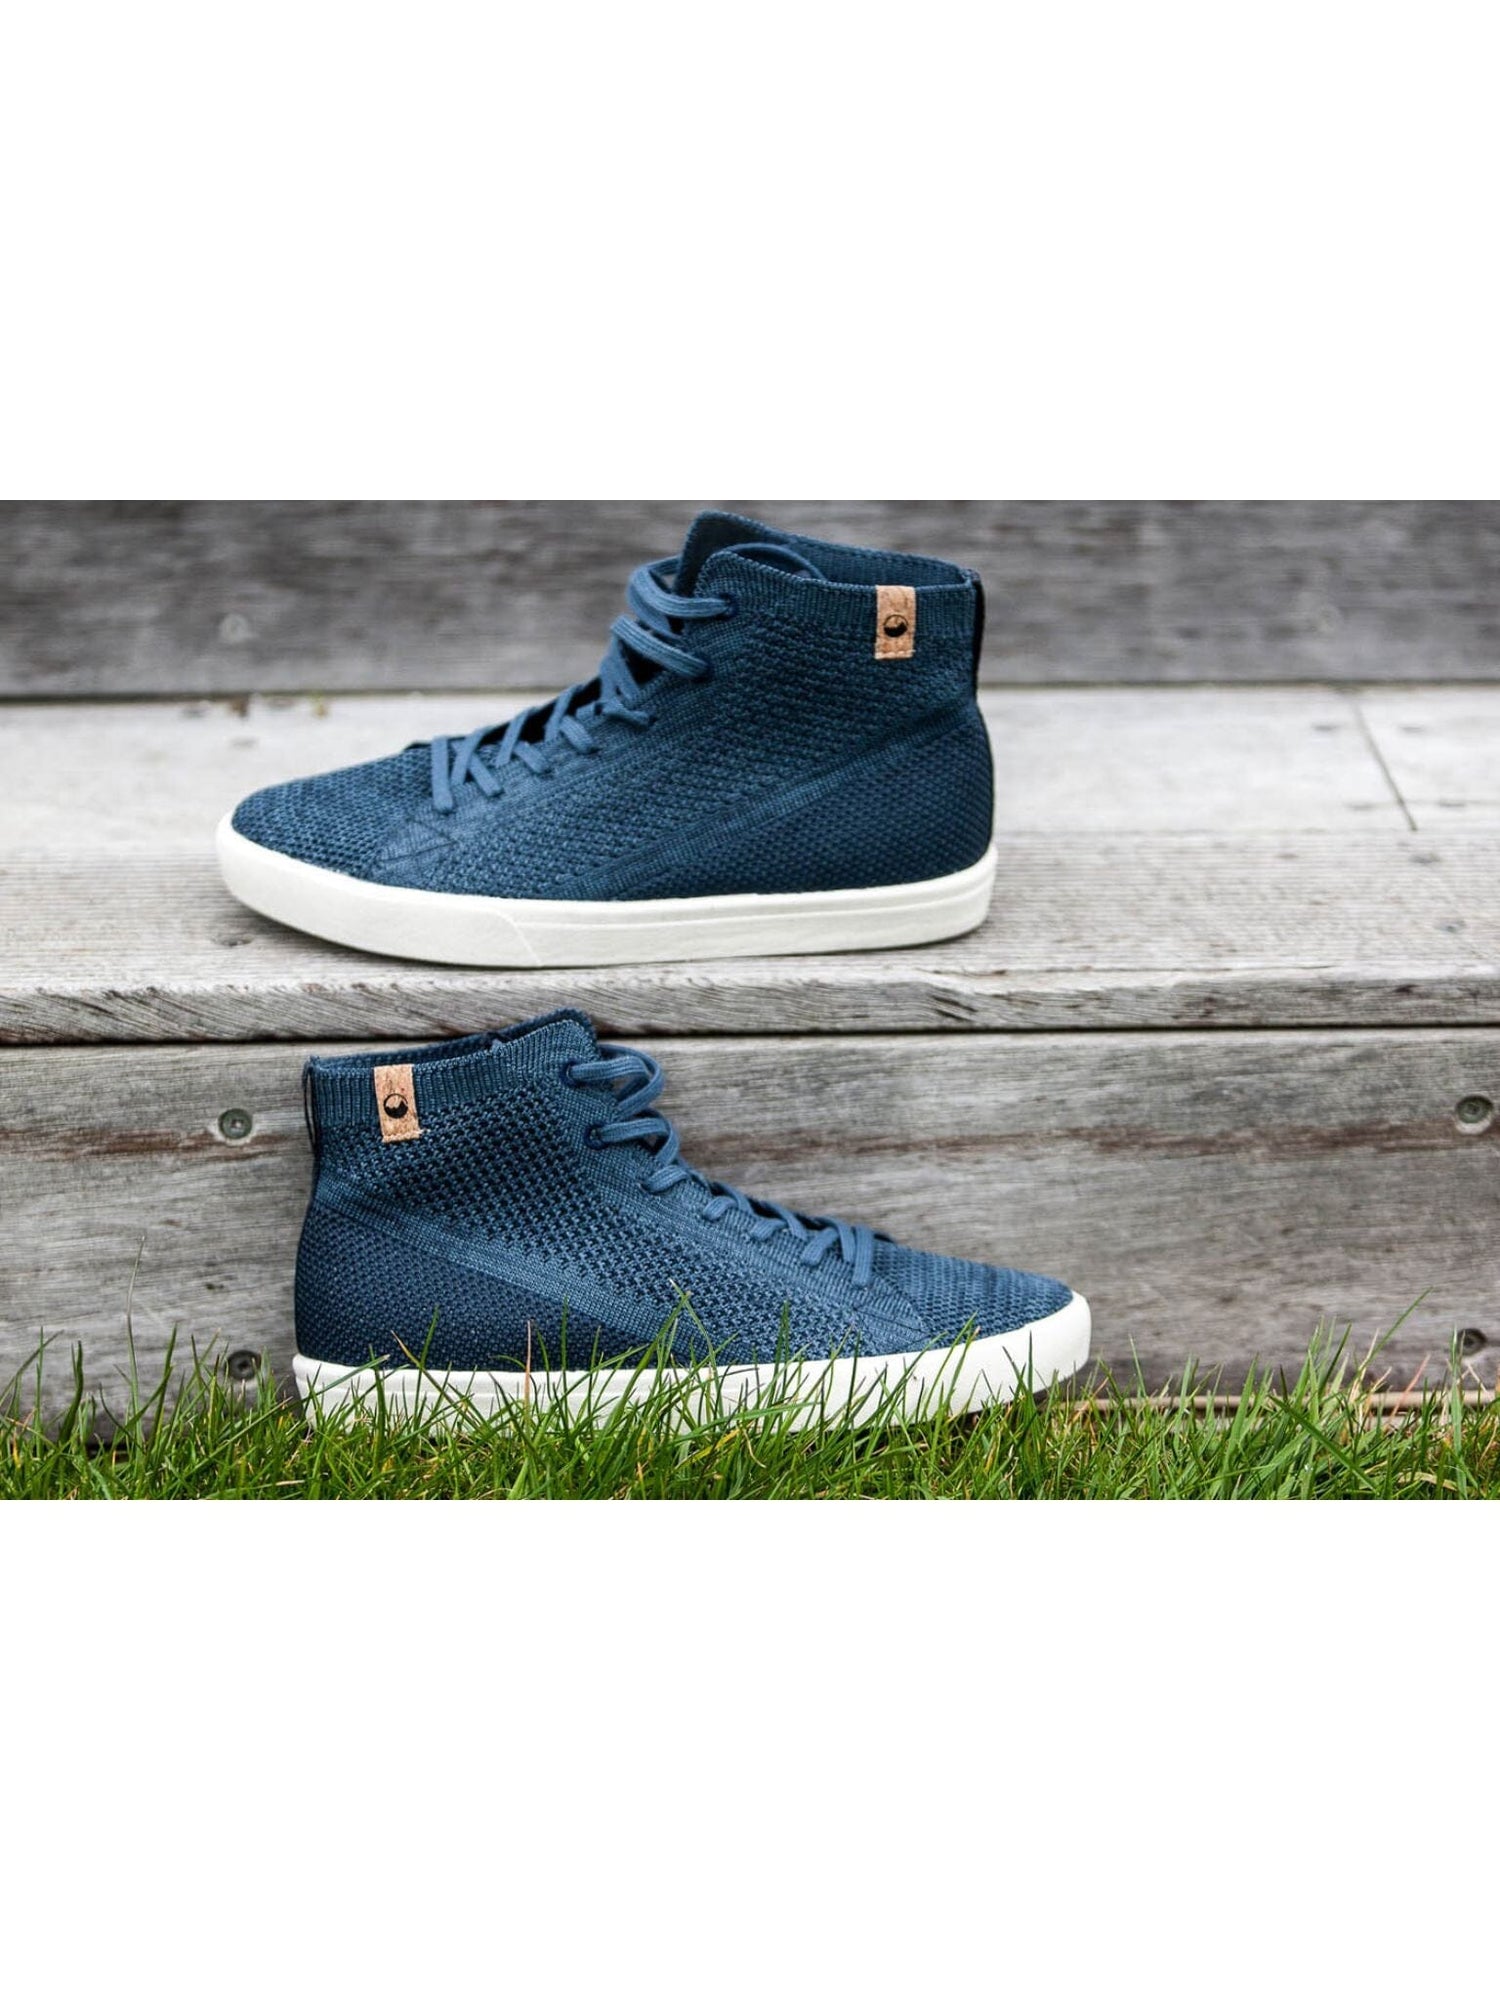 Saola - W's Wanaka Knit Sneakers - Recycled PET and Bio-sourced materials - Weekendbee - sustainable sportswear